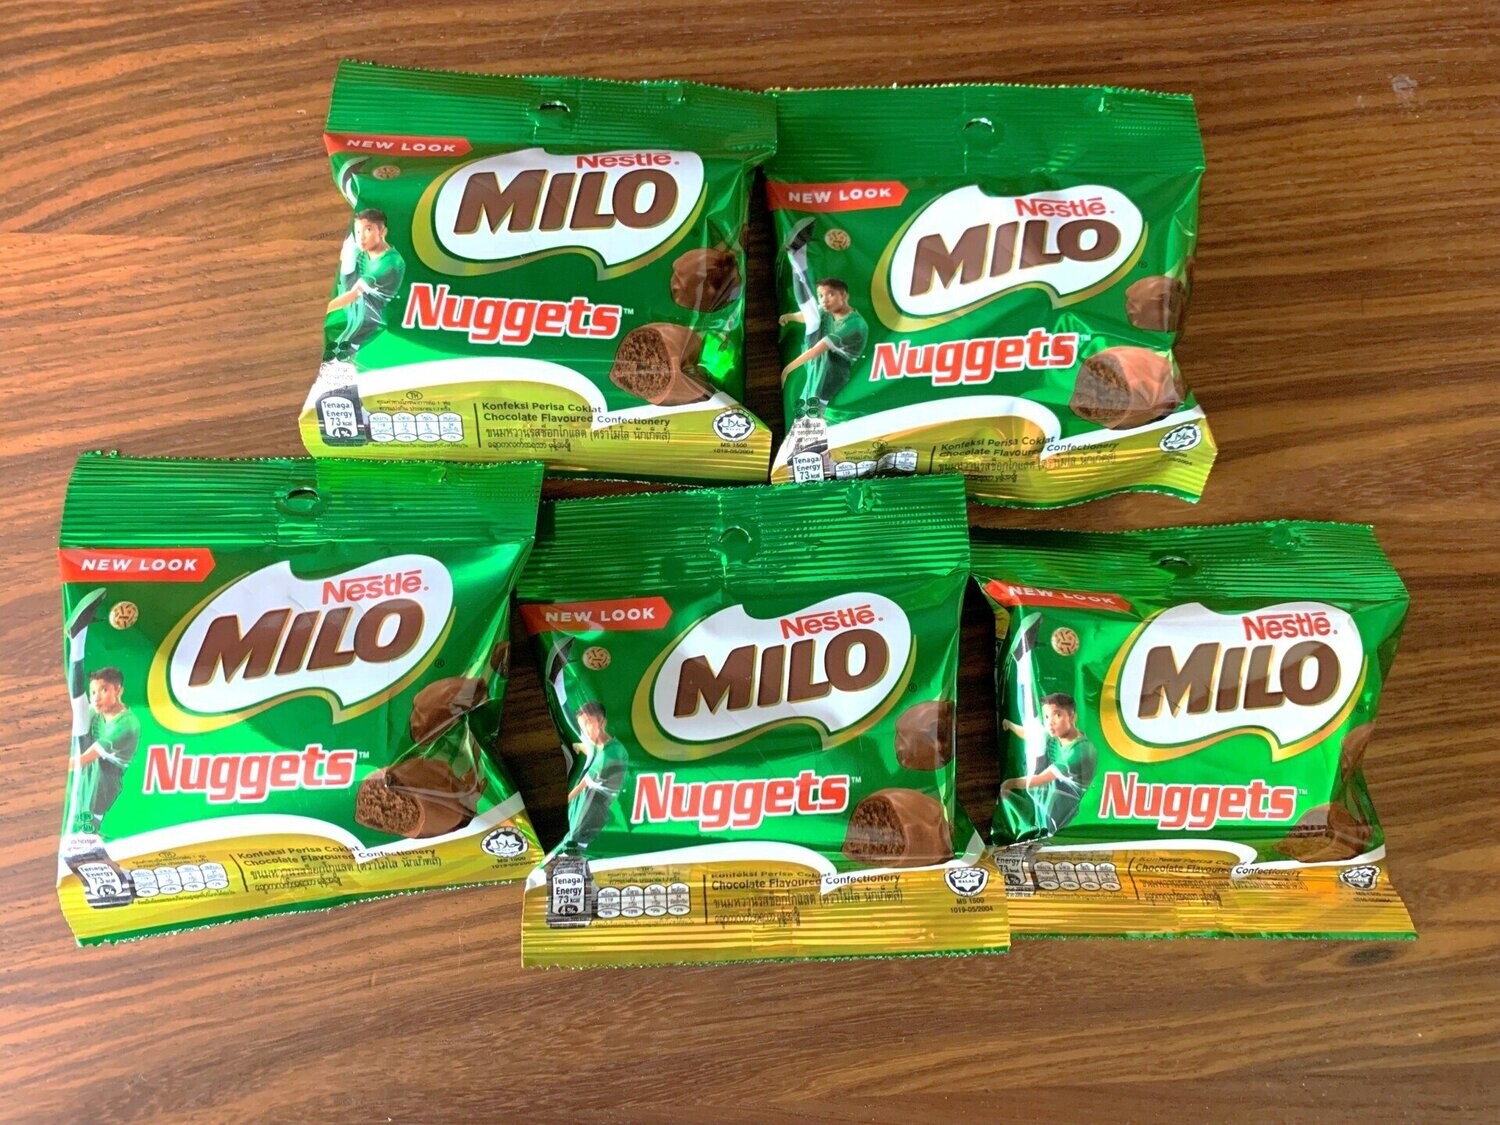 MILO Nuggets Malaysian - 5 Pack